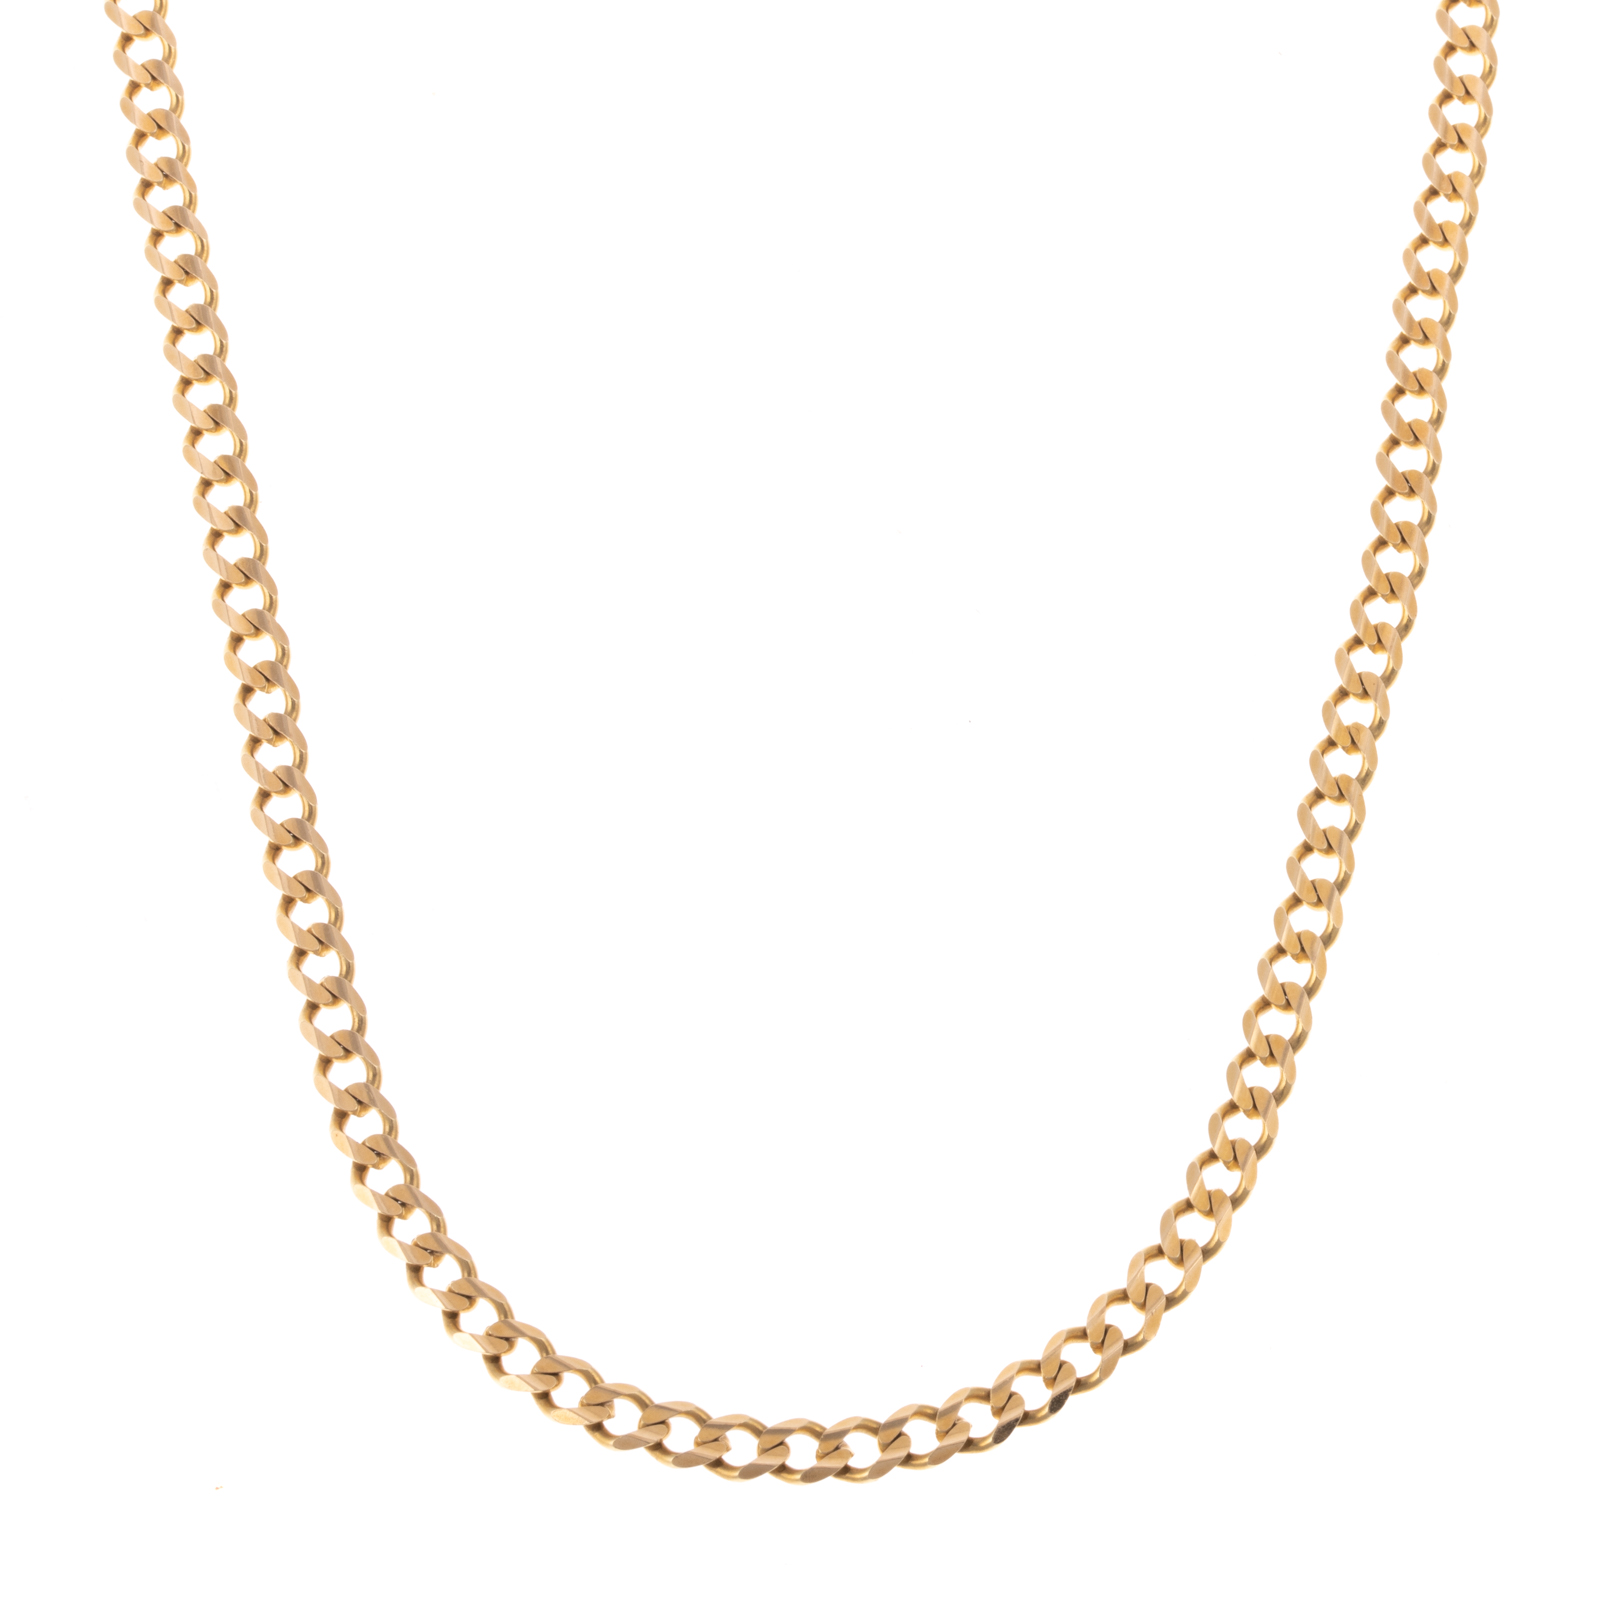 A HEAVY CURB LINK NECKLACE IN 14K